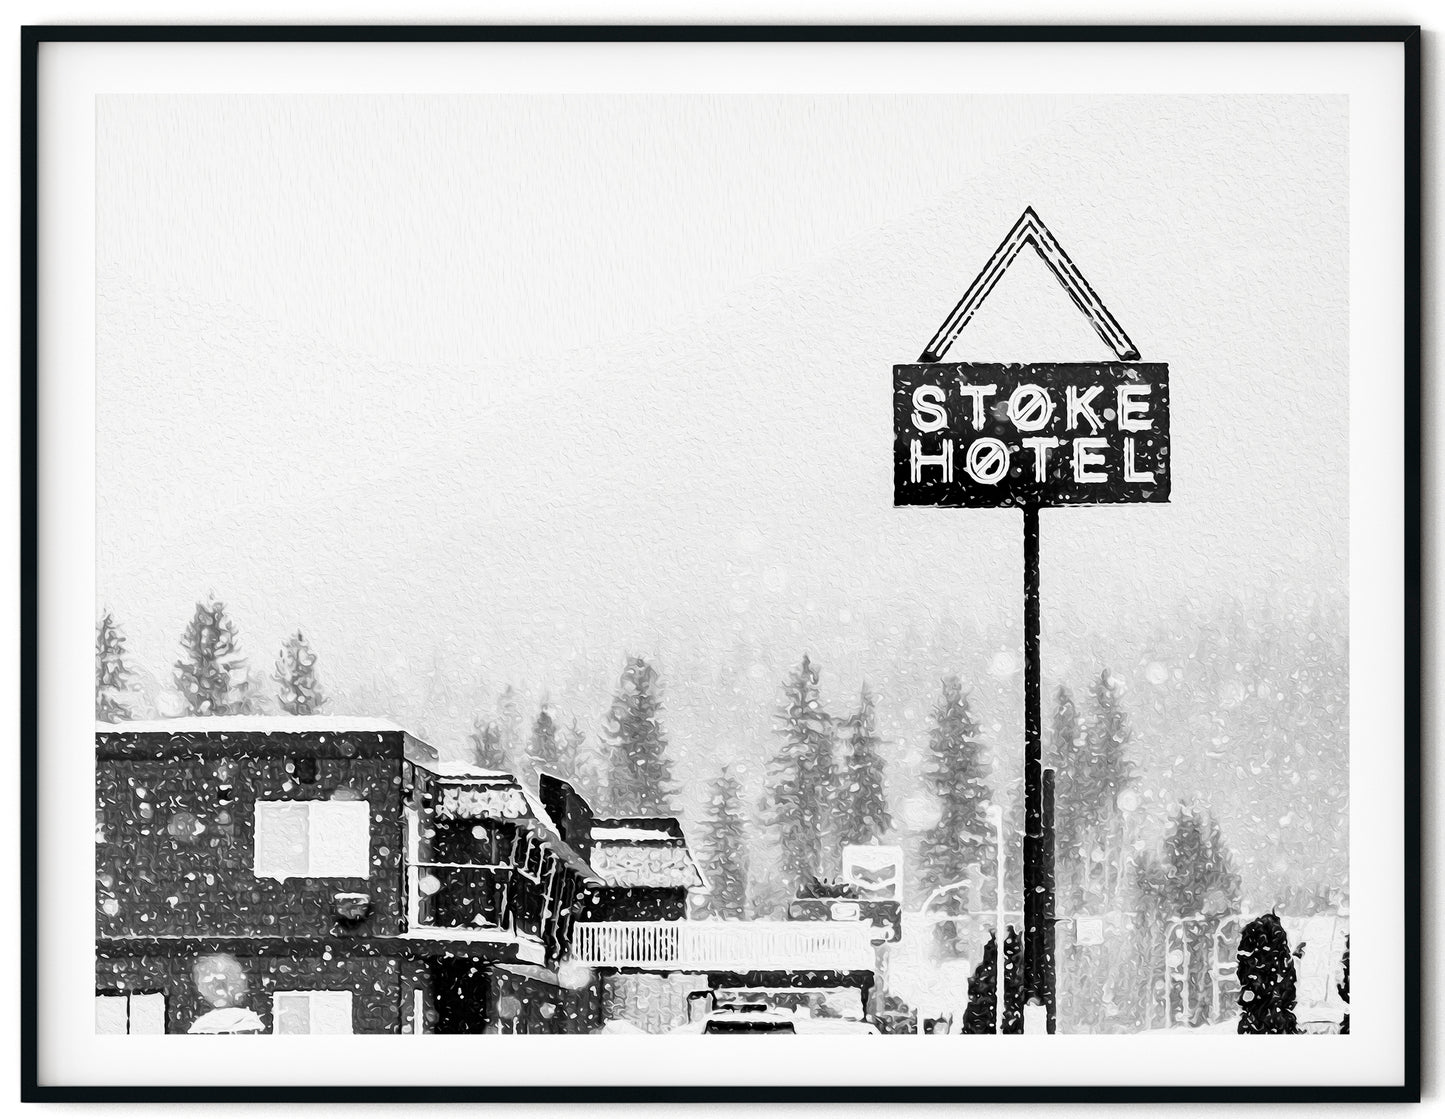 The Stoke is High